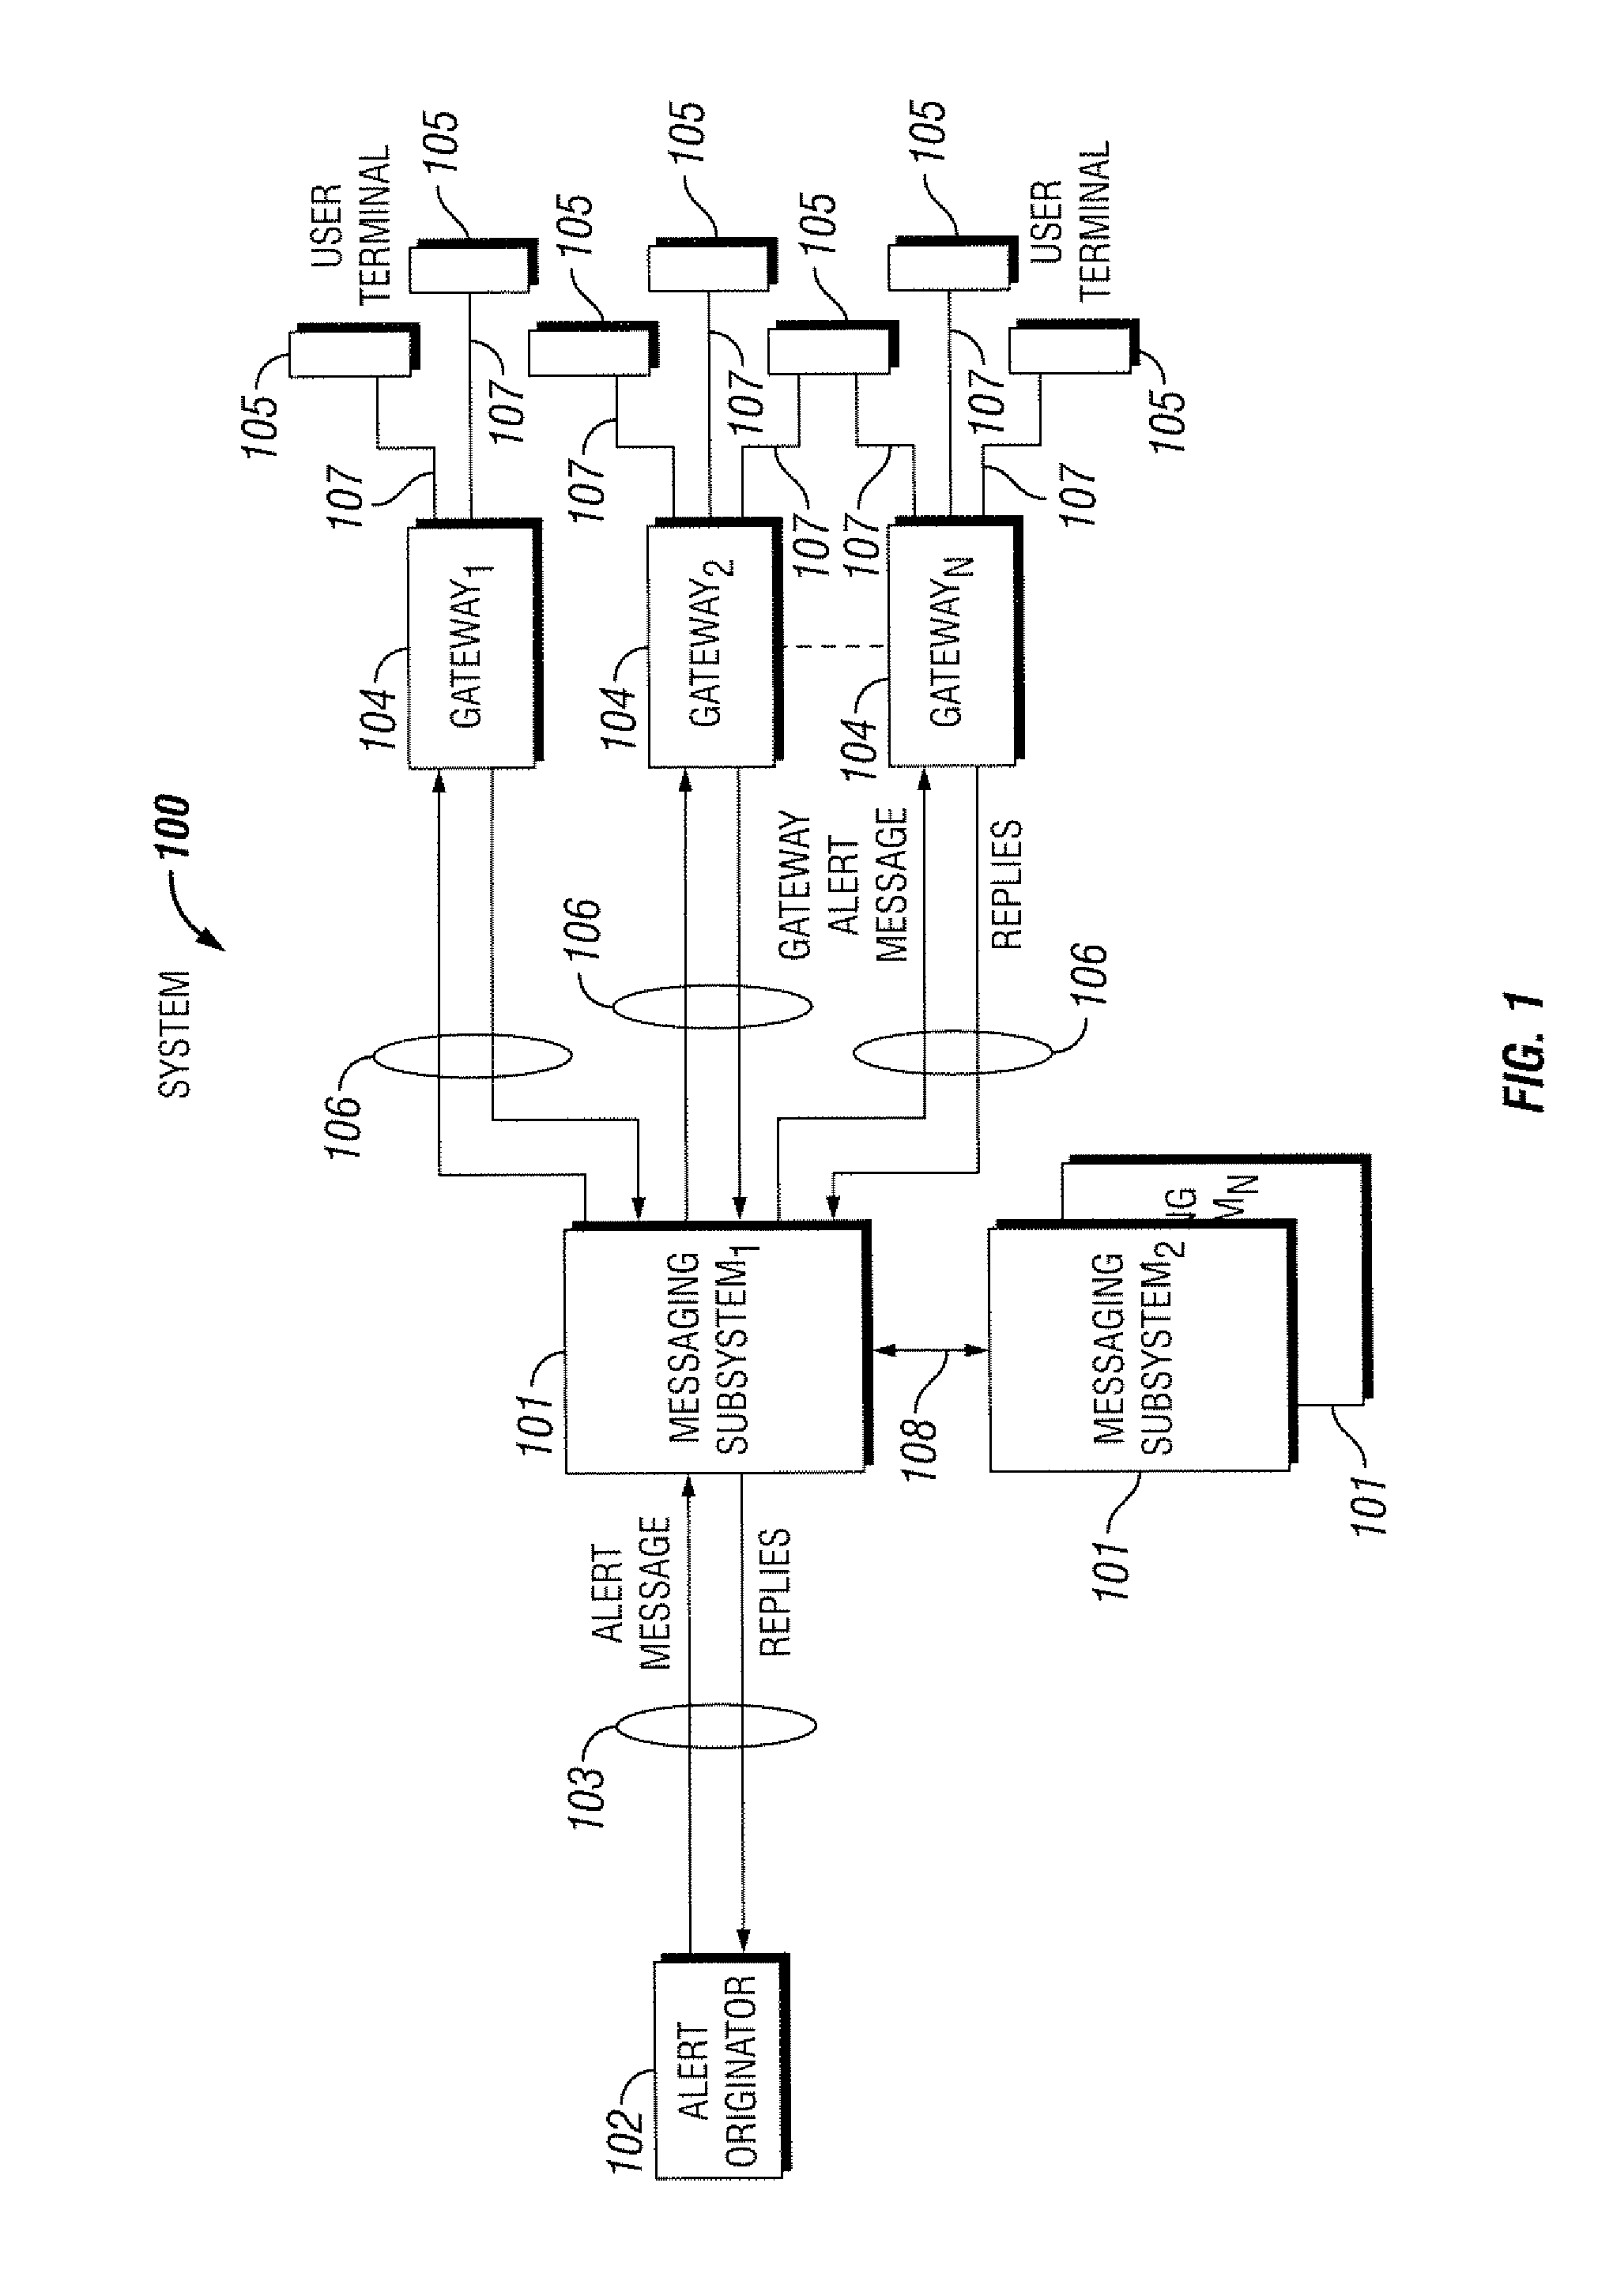 Systems and methods for messaging to multiple gateways